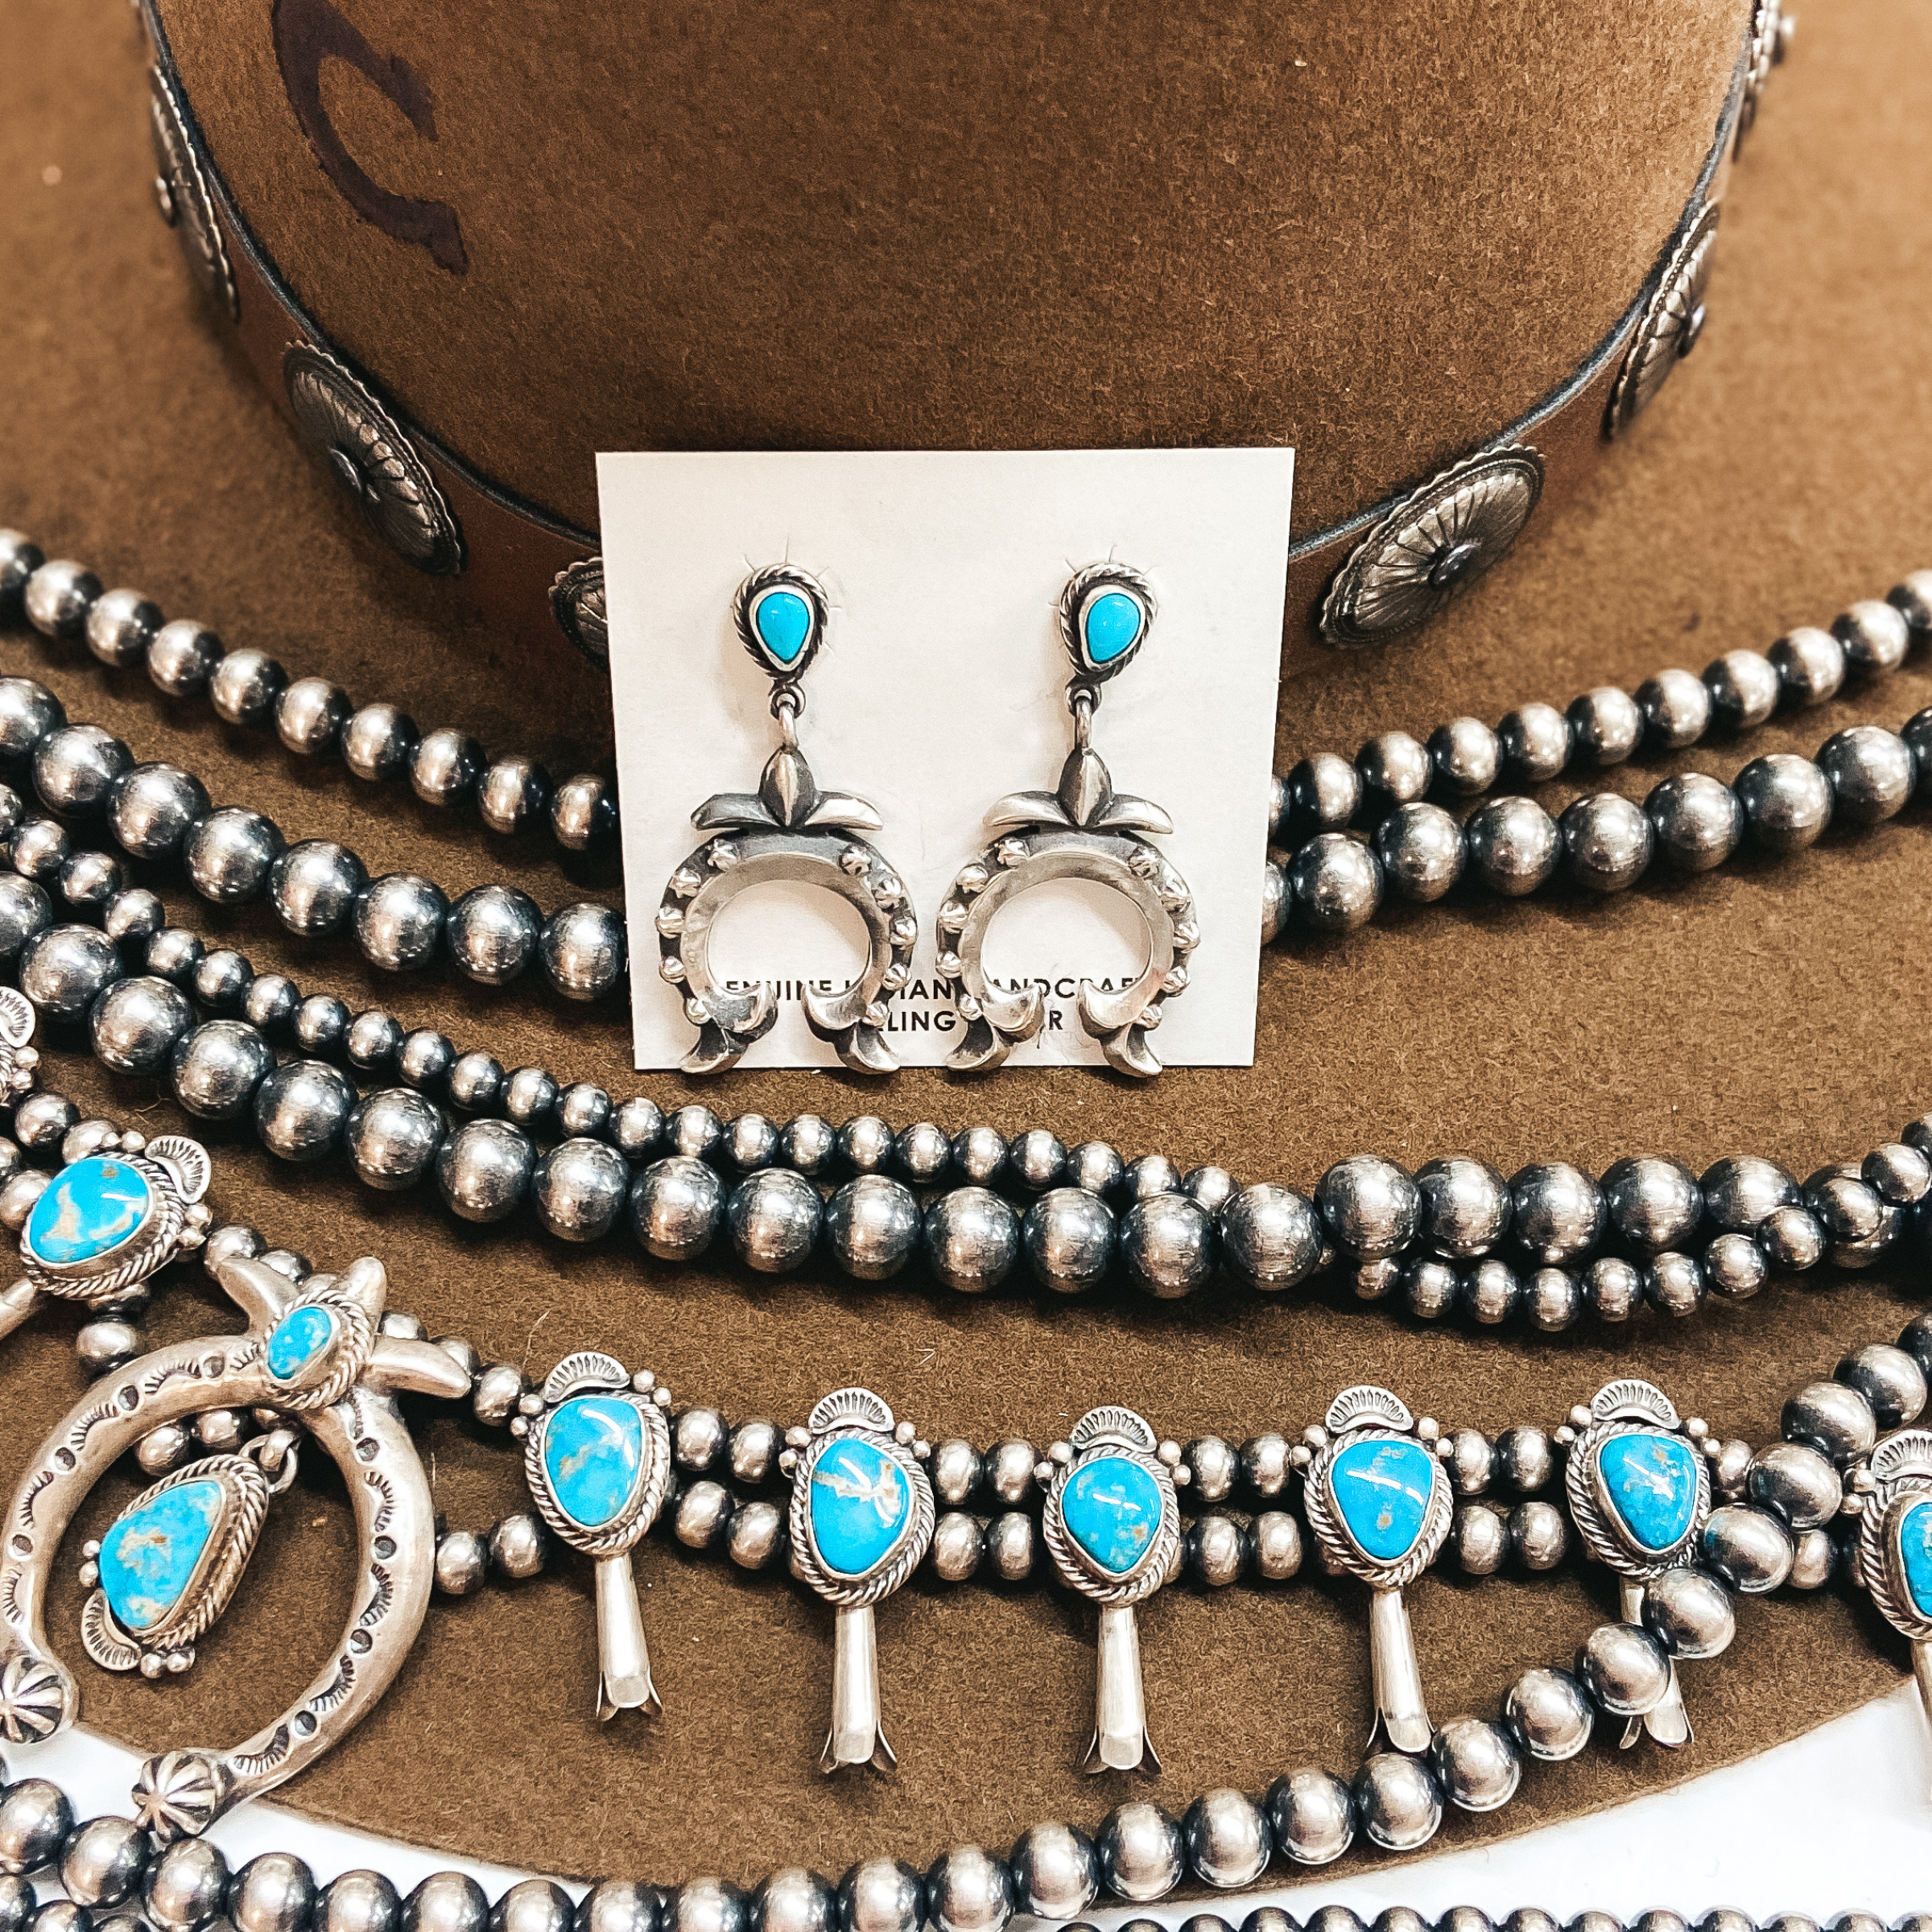 Verley Betone | Navajo Handmade Sterling Silver Naja Drop Earrings with Kingman Turquoise Post - Giddy Up Glamour Boutique